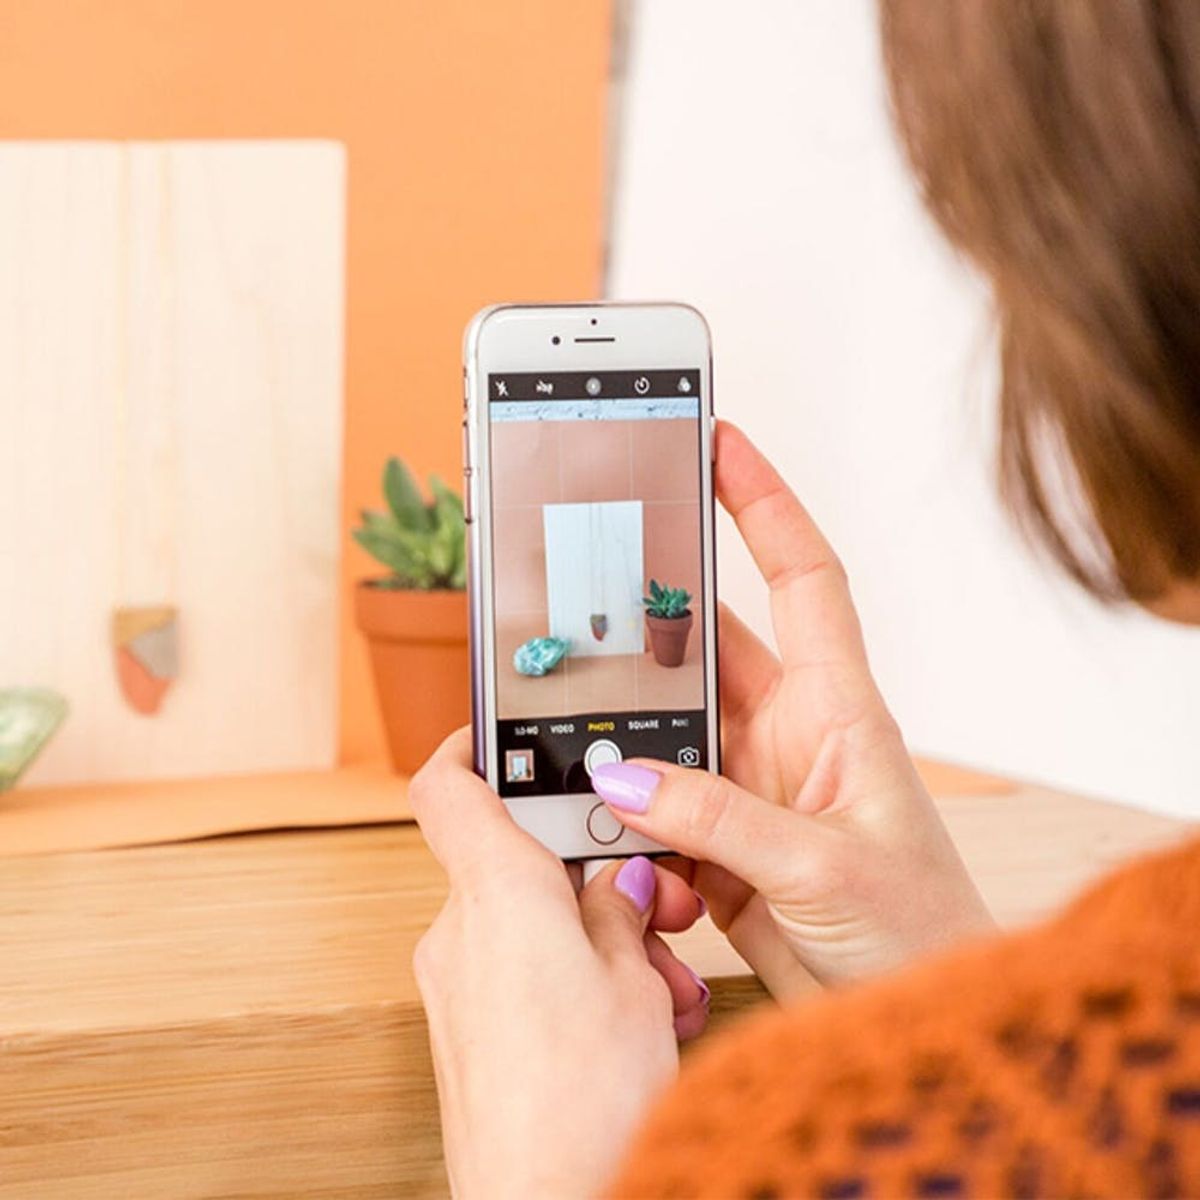 Learn How to Take Amazing Product Photos With Just Your Phone (and Build Your Own Online Store)